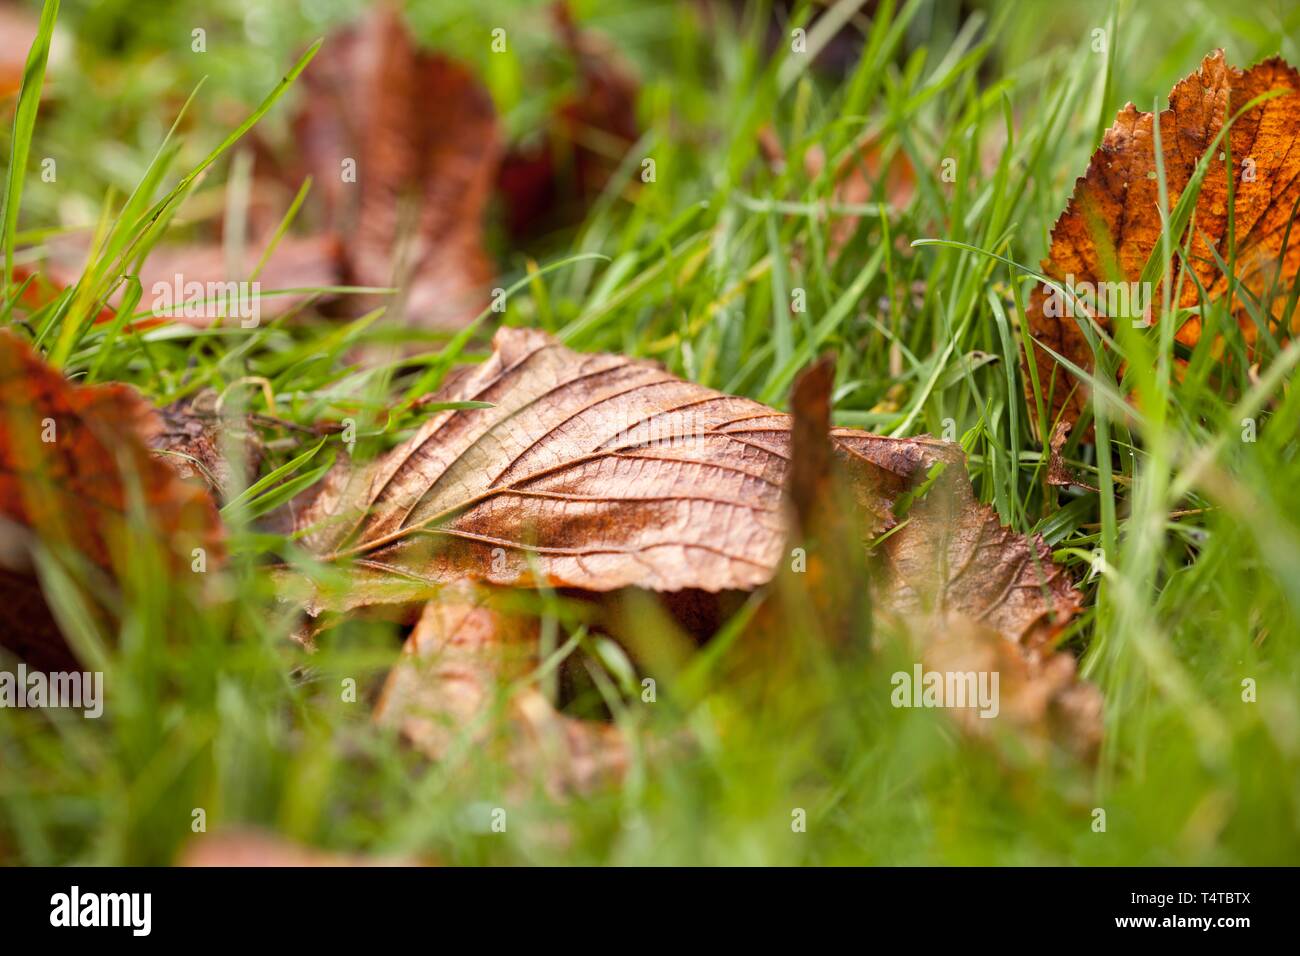 Leaves in the grass Stock Photo